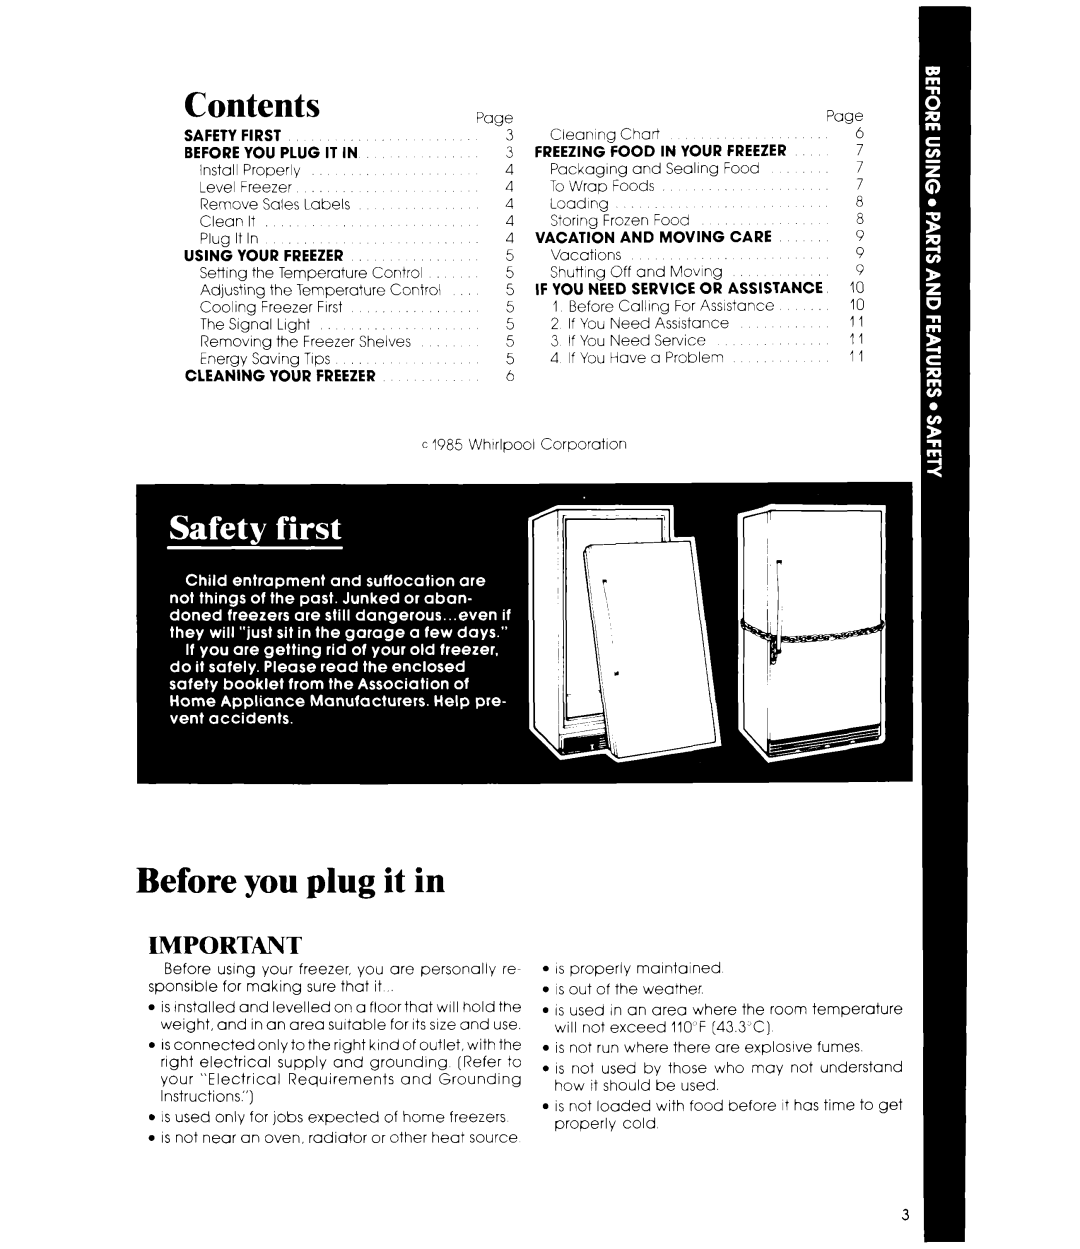 Whirlpool EV090F manual Contents, Before you plug it in, Lmportant 